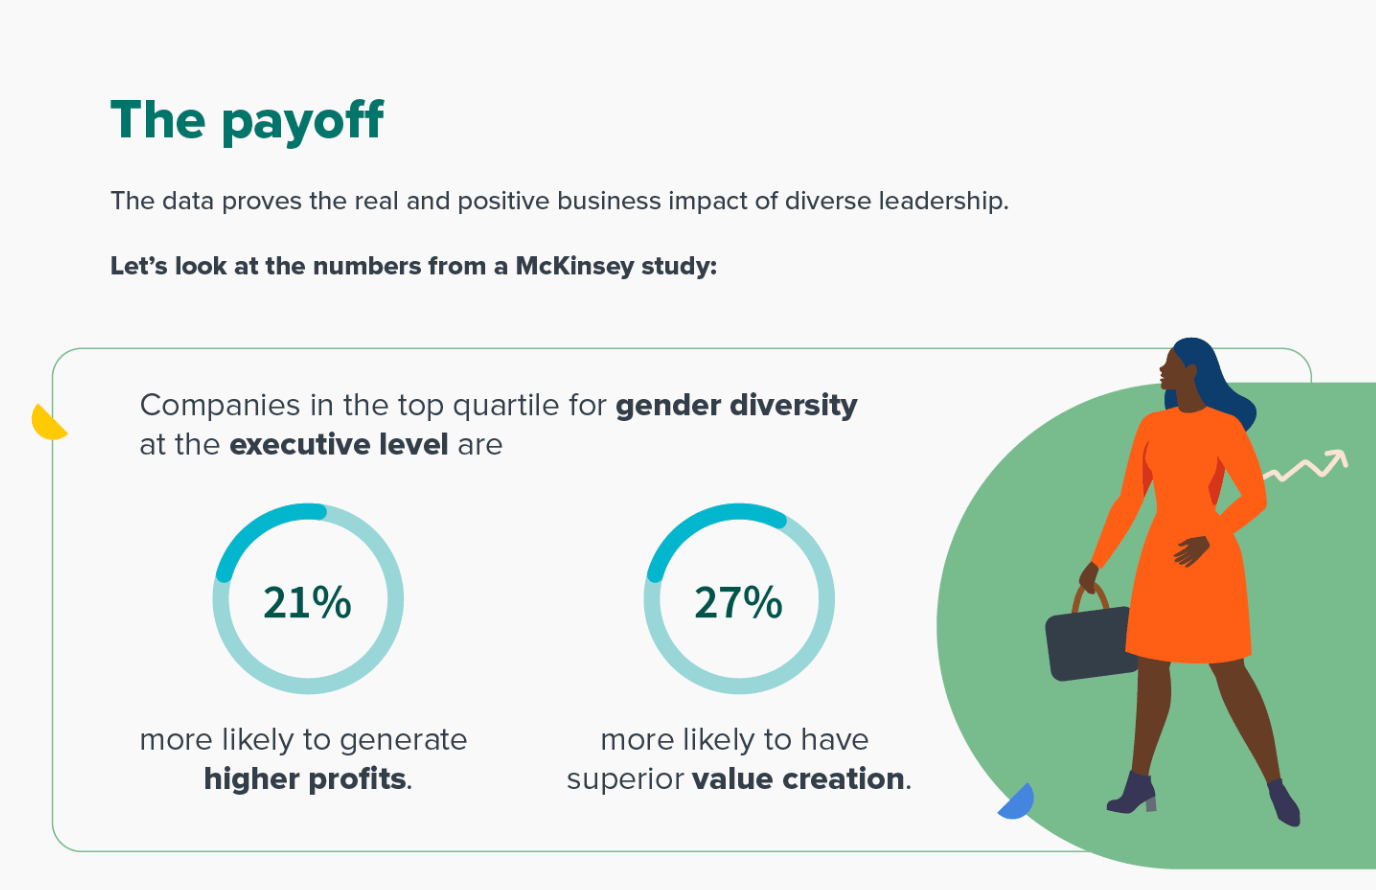 Companies in the top quartile for gender diversity at the executive level are 21% more likely to generate higher profits and 27% more likely to have superior value creation.